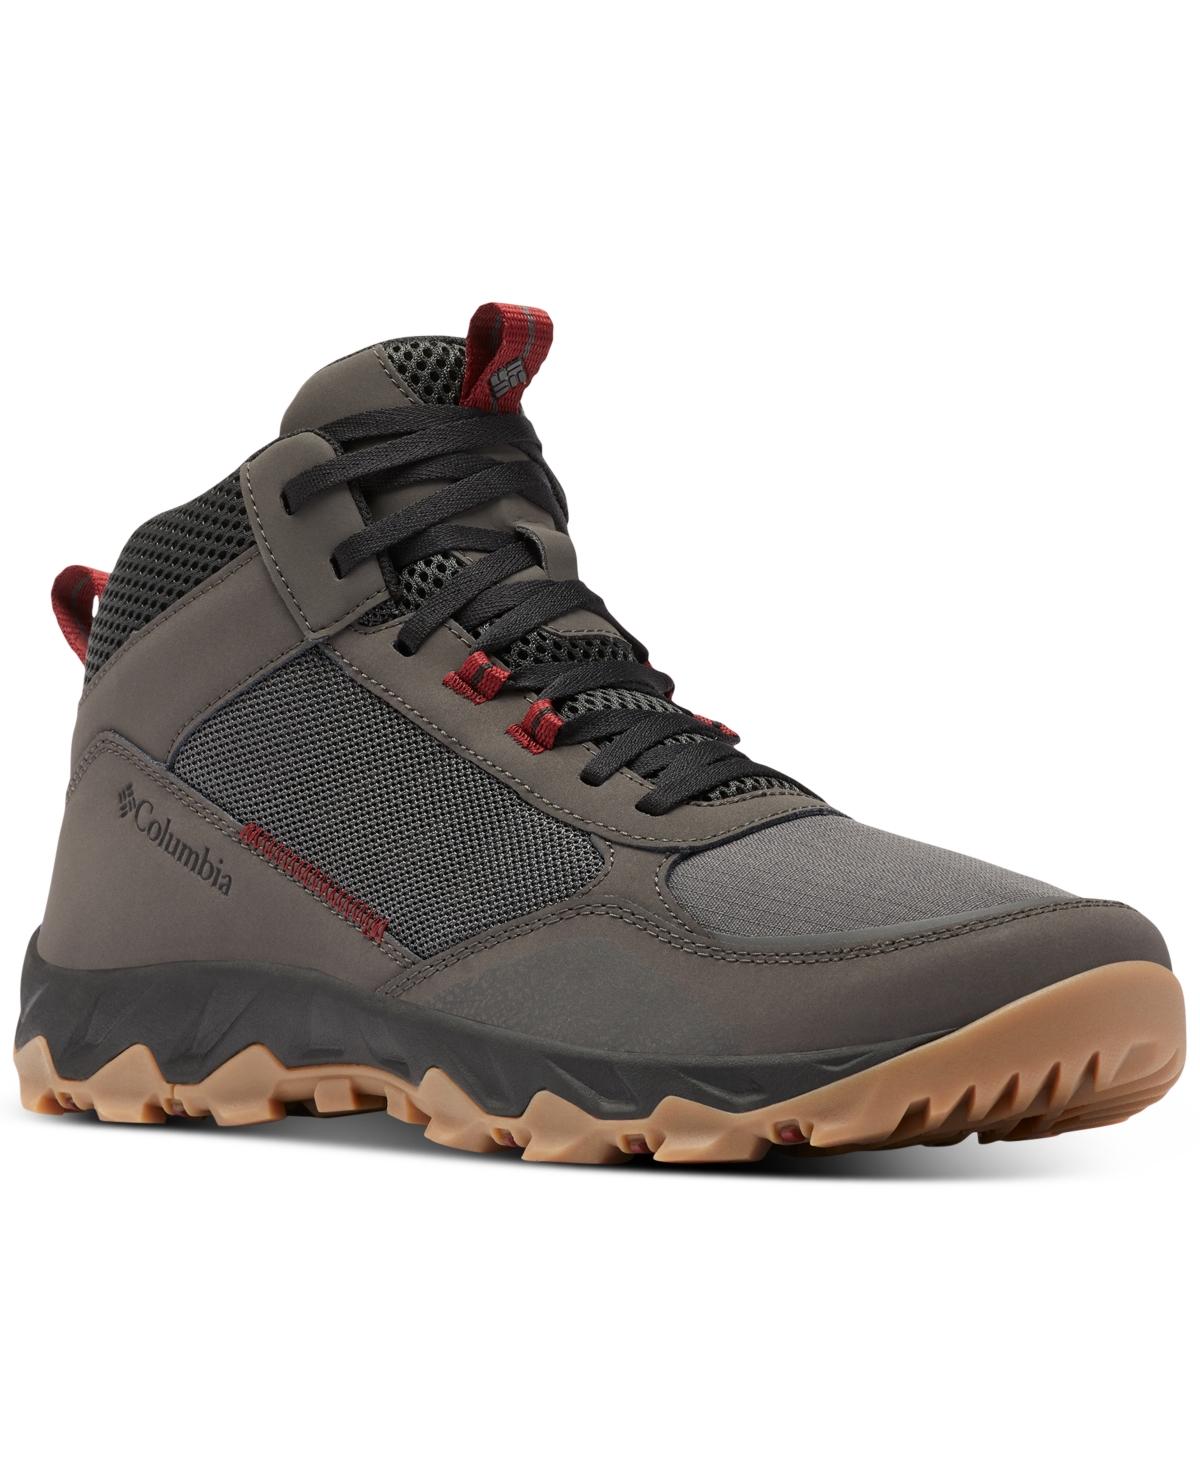 Men's Flow Centre Boots - Grill, Poppy Red